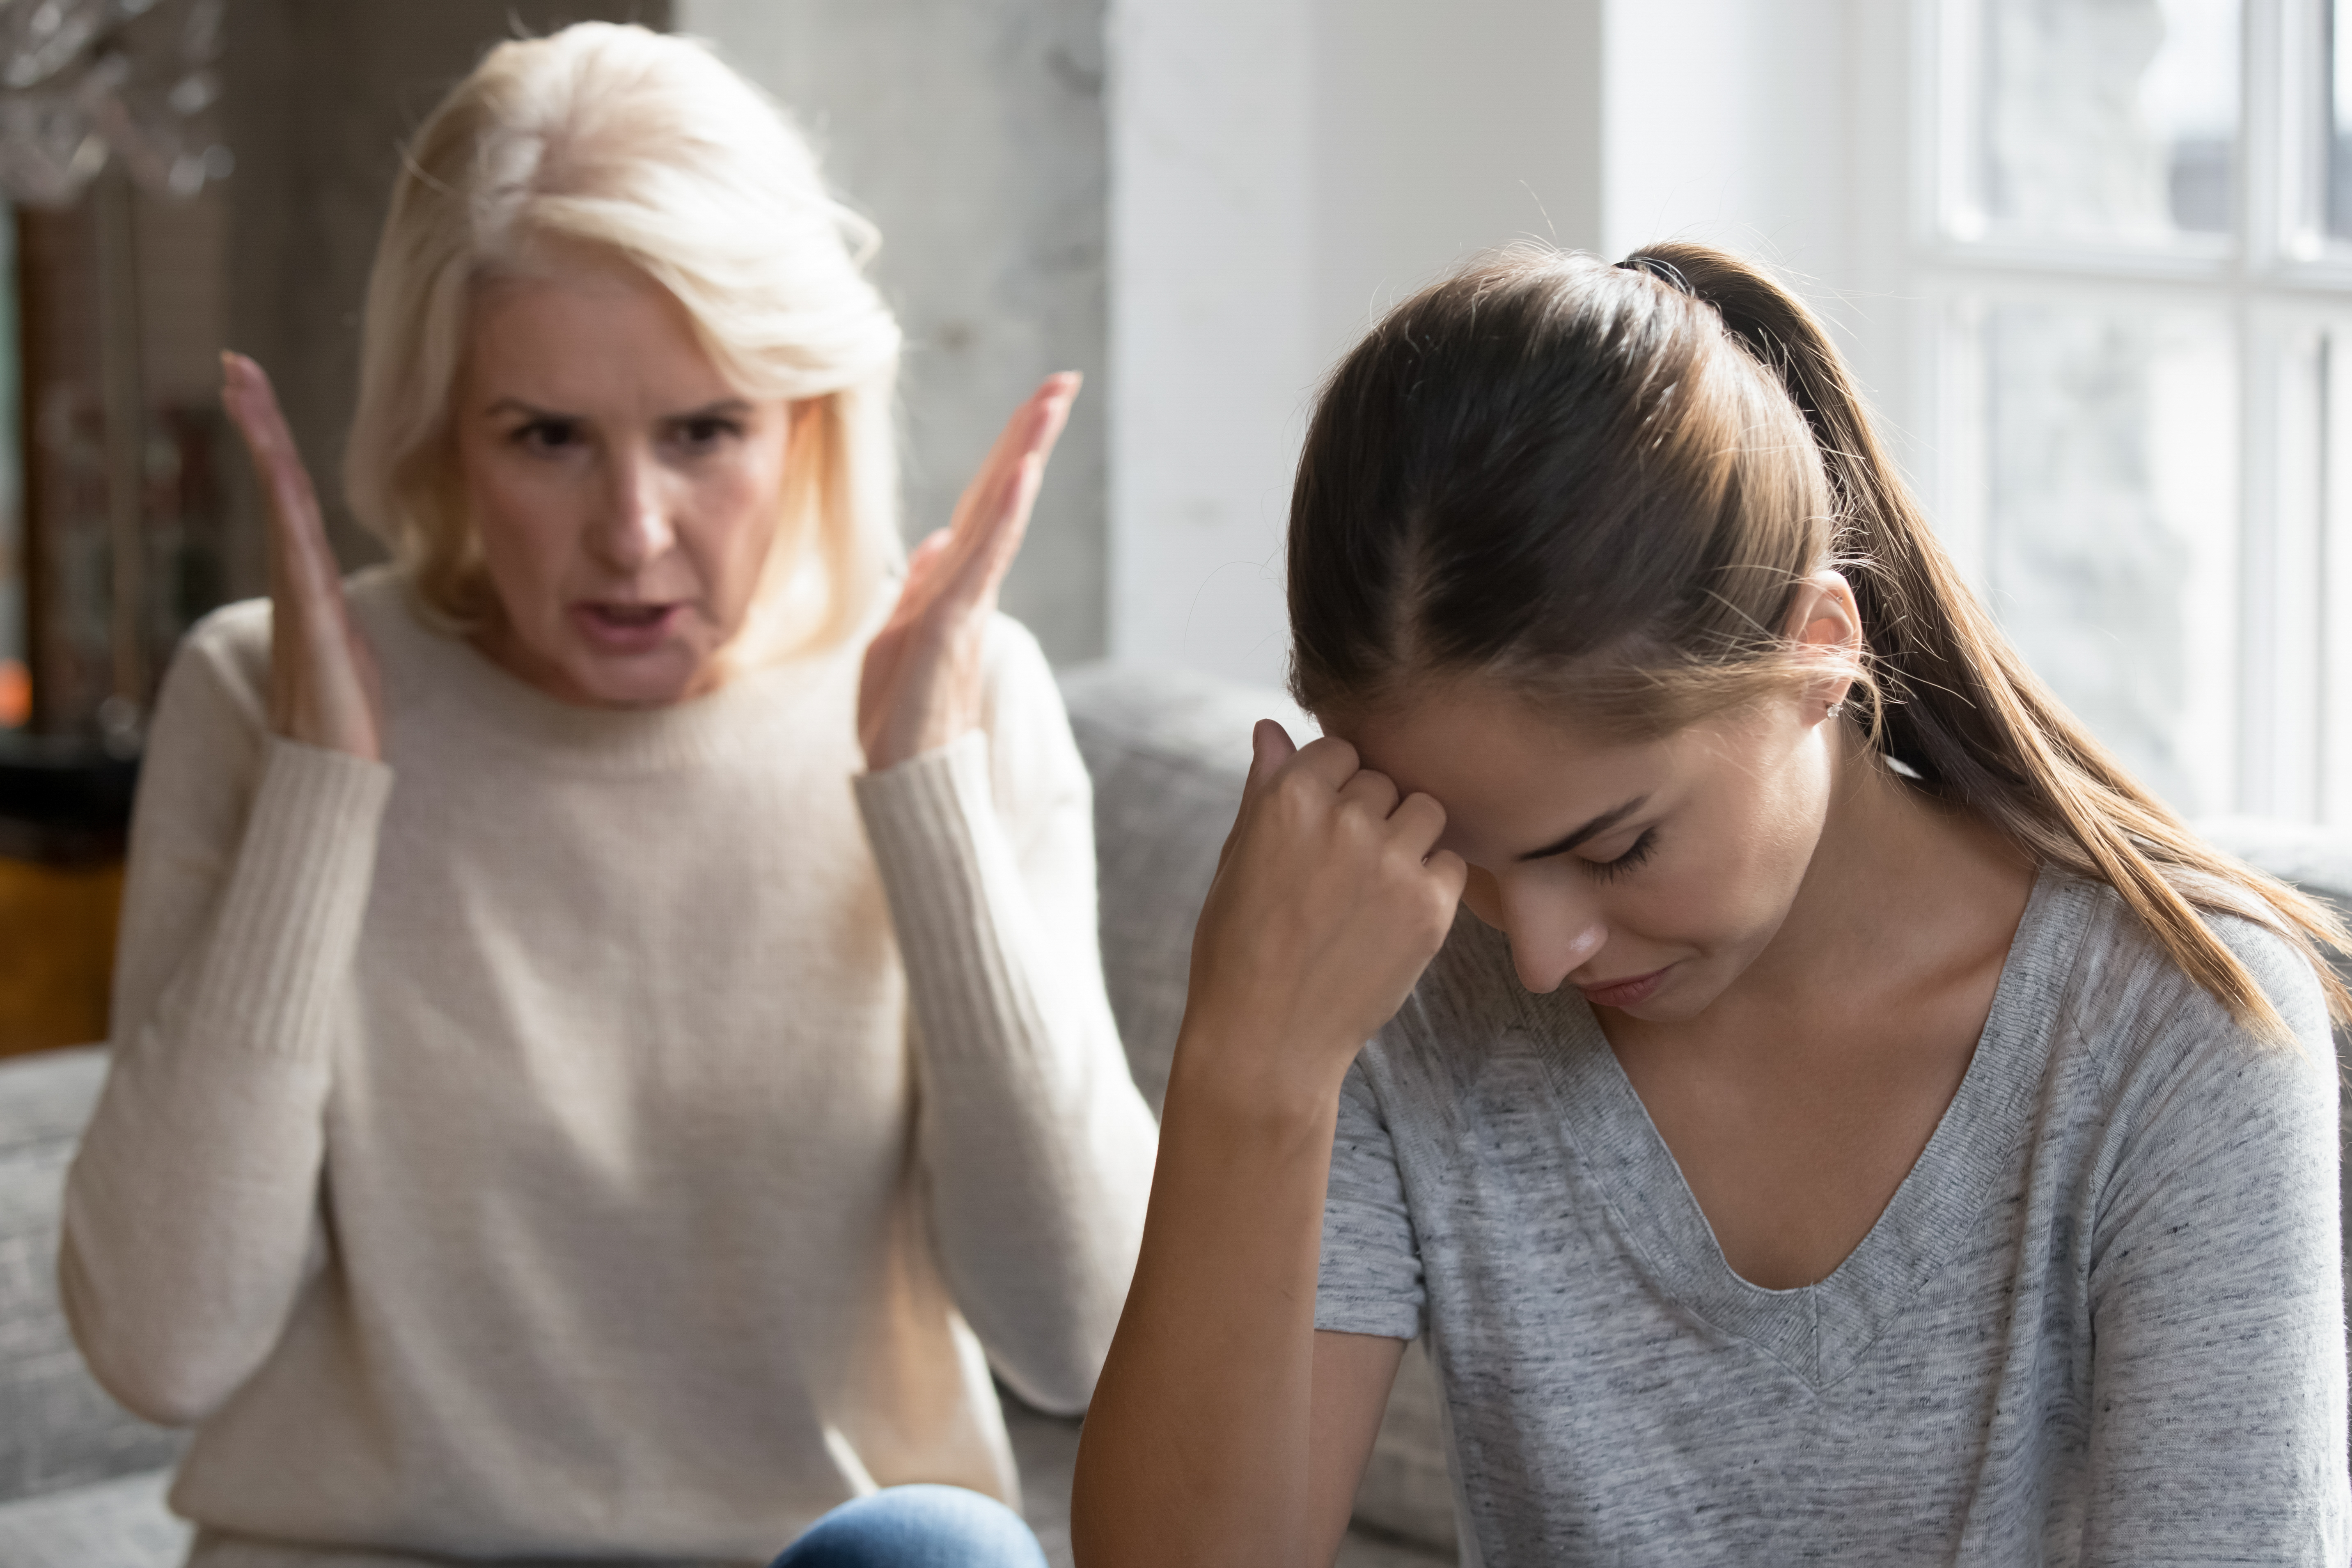 Mother-in-law sit on couch scolds daughter-in-law. | Source: Shutterstock